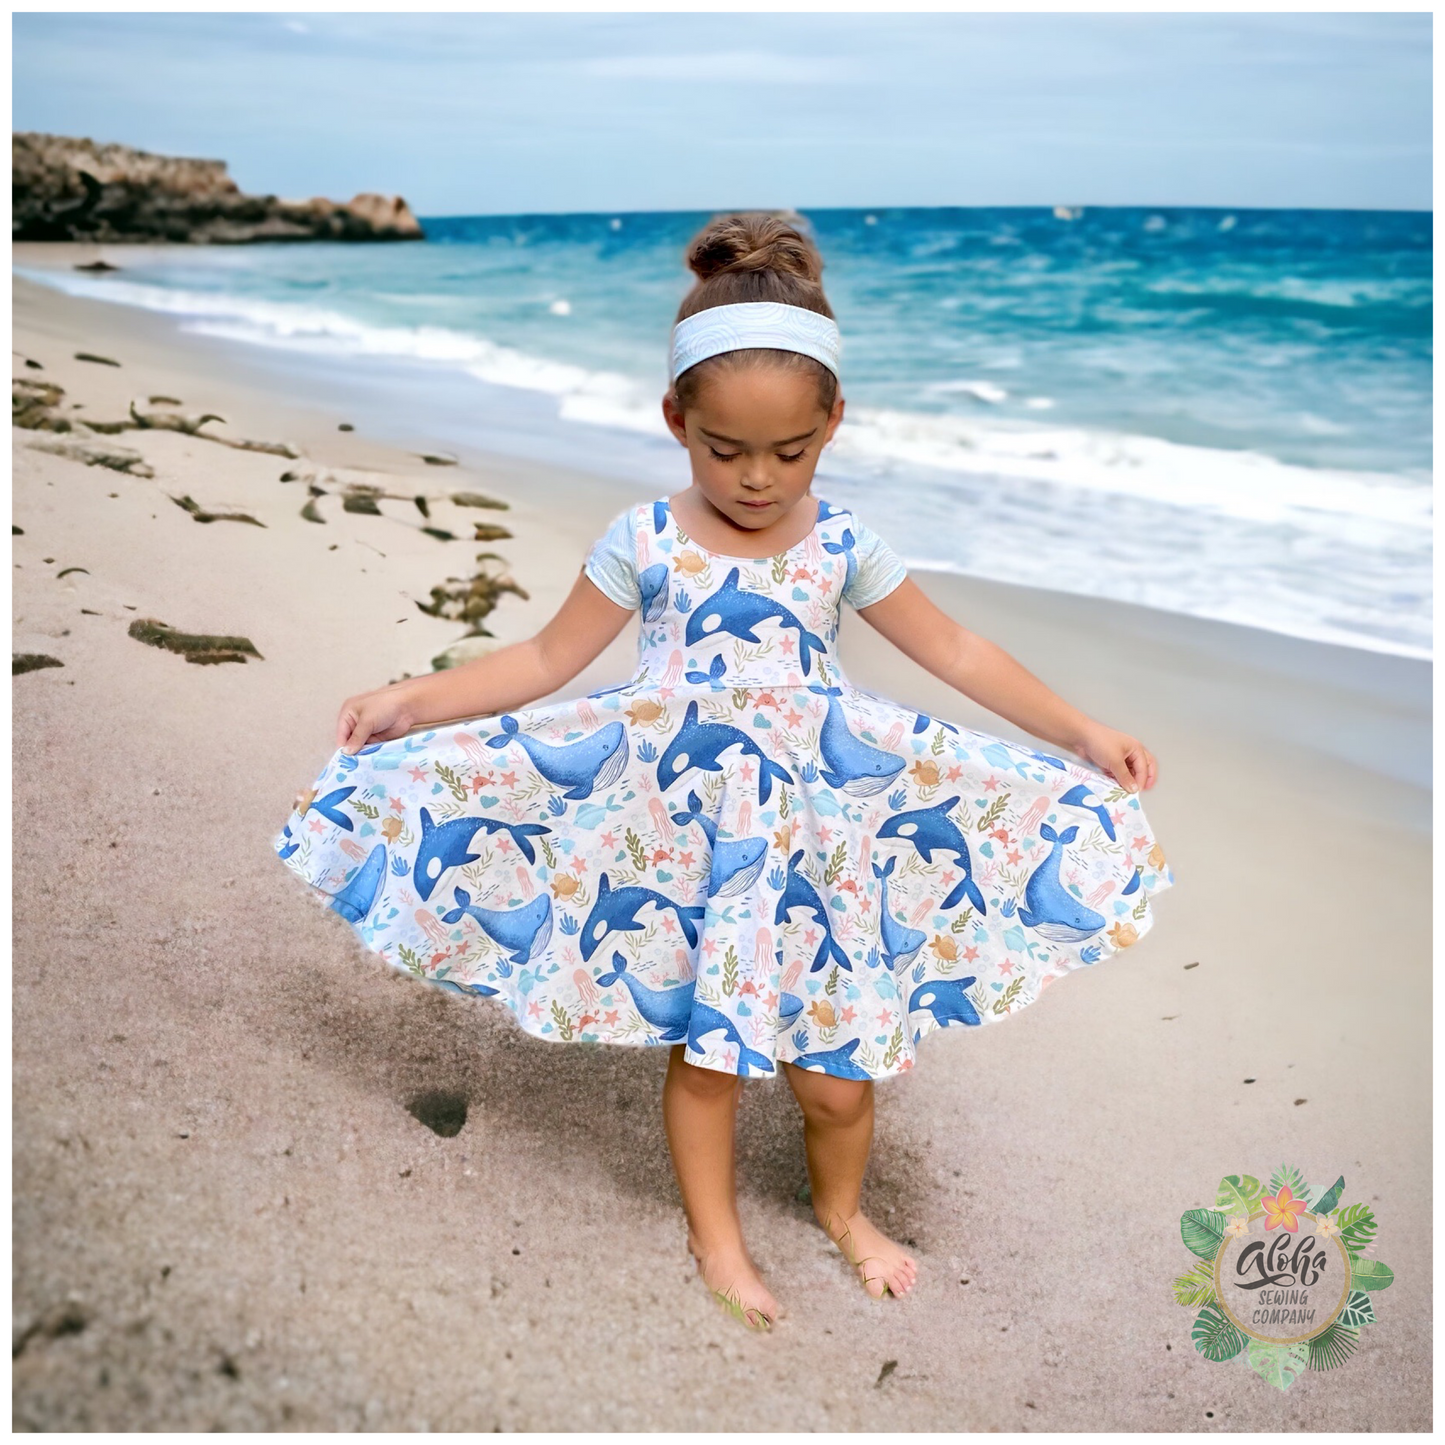 baby and girls tie back twirl dress sewing pattern for beginners with an open back that ties. Sew with a regular sewing machine or a serger! aloha sewing company